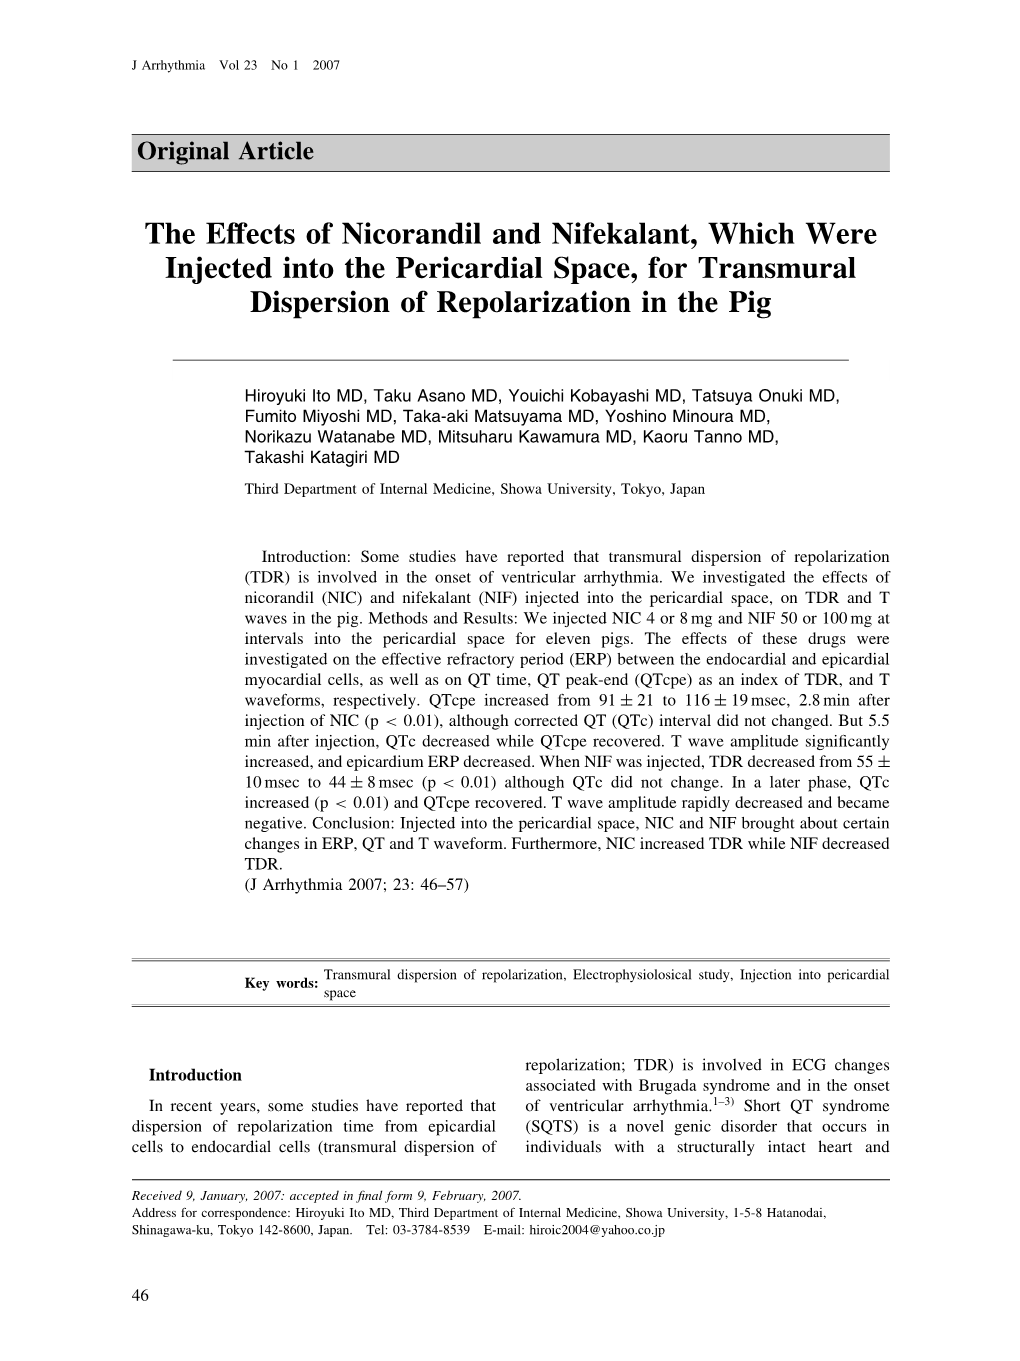 The Effects of Nicorandil and Nifekalant, Which Were Injected